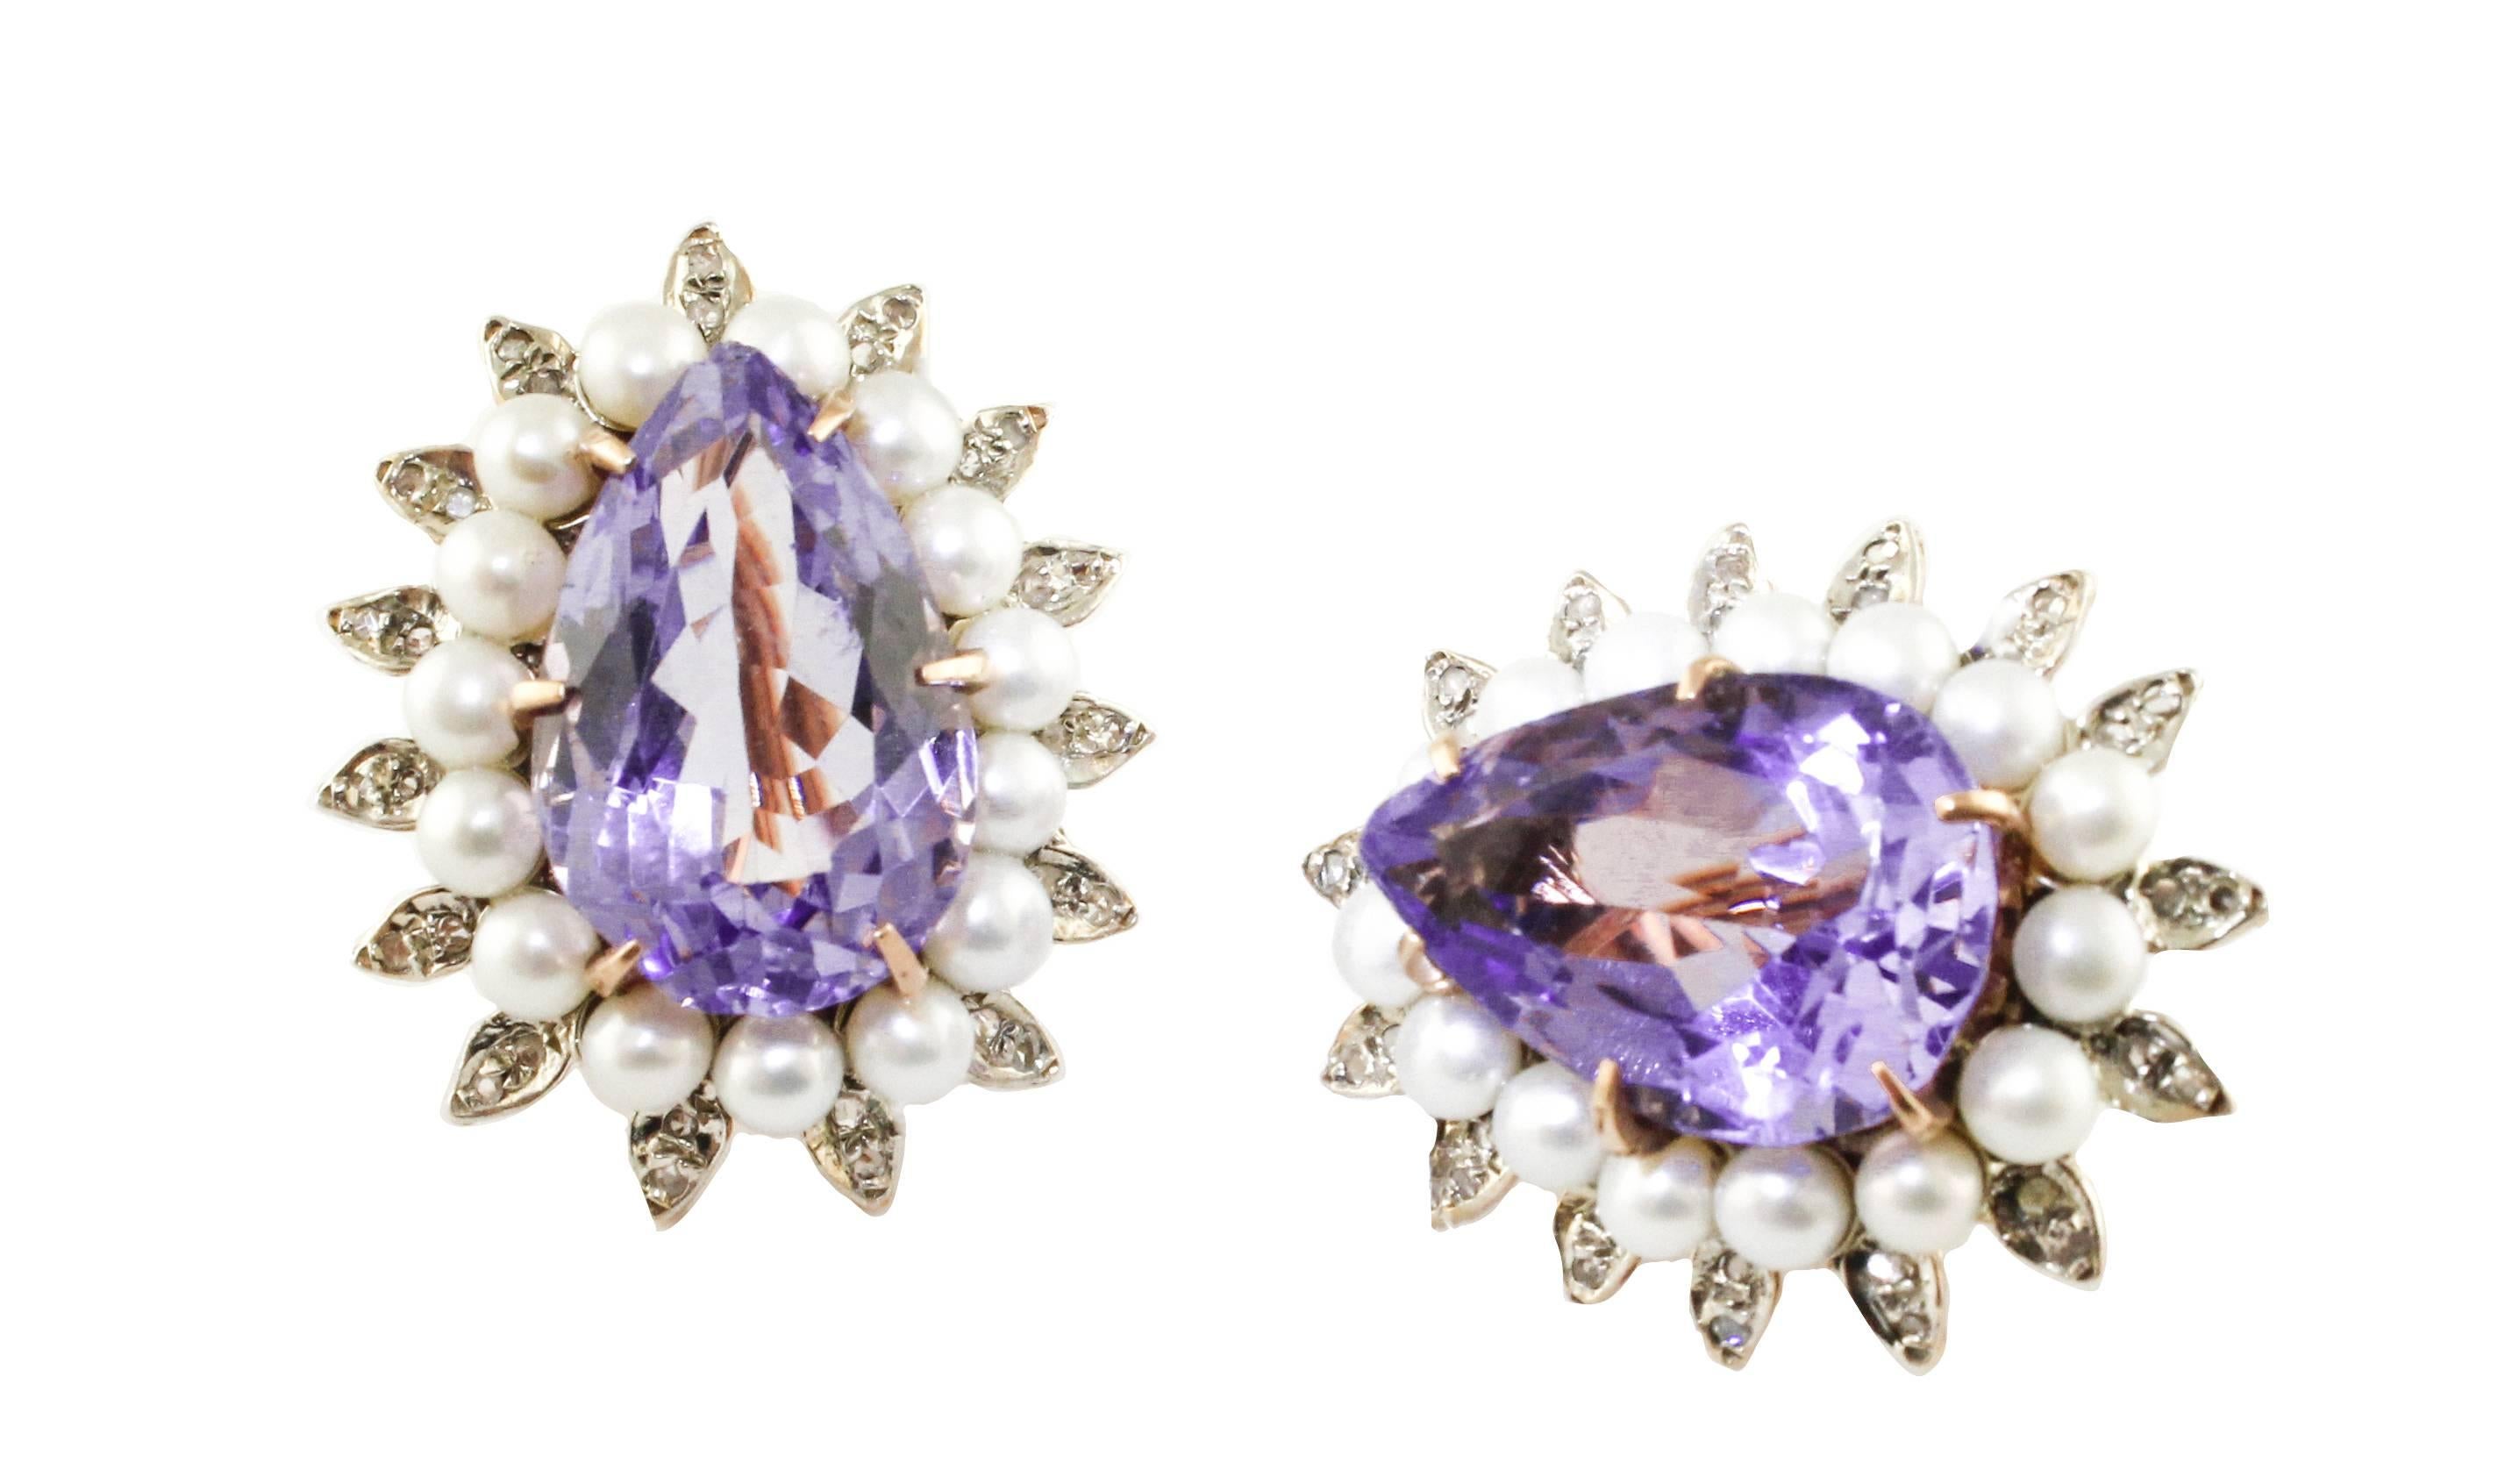 Fabulous and bright 9 kt rose gold and silver earring, with a marvelous 17.3 ct drop-shaped amethyst with around 1.10 g beads and as a frame for 0.24 ct diamond leaves. Total weight g 12.79
Amethyst ct 17,30
Pearls g 1.10
Diamonds ct 0.24
Total